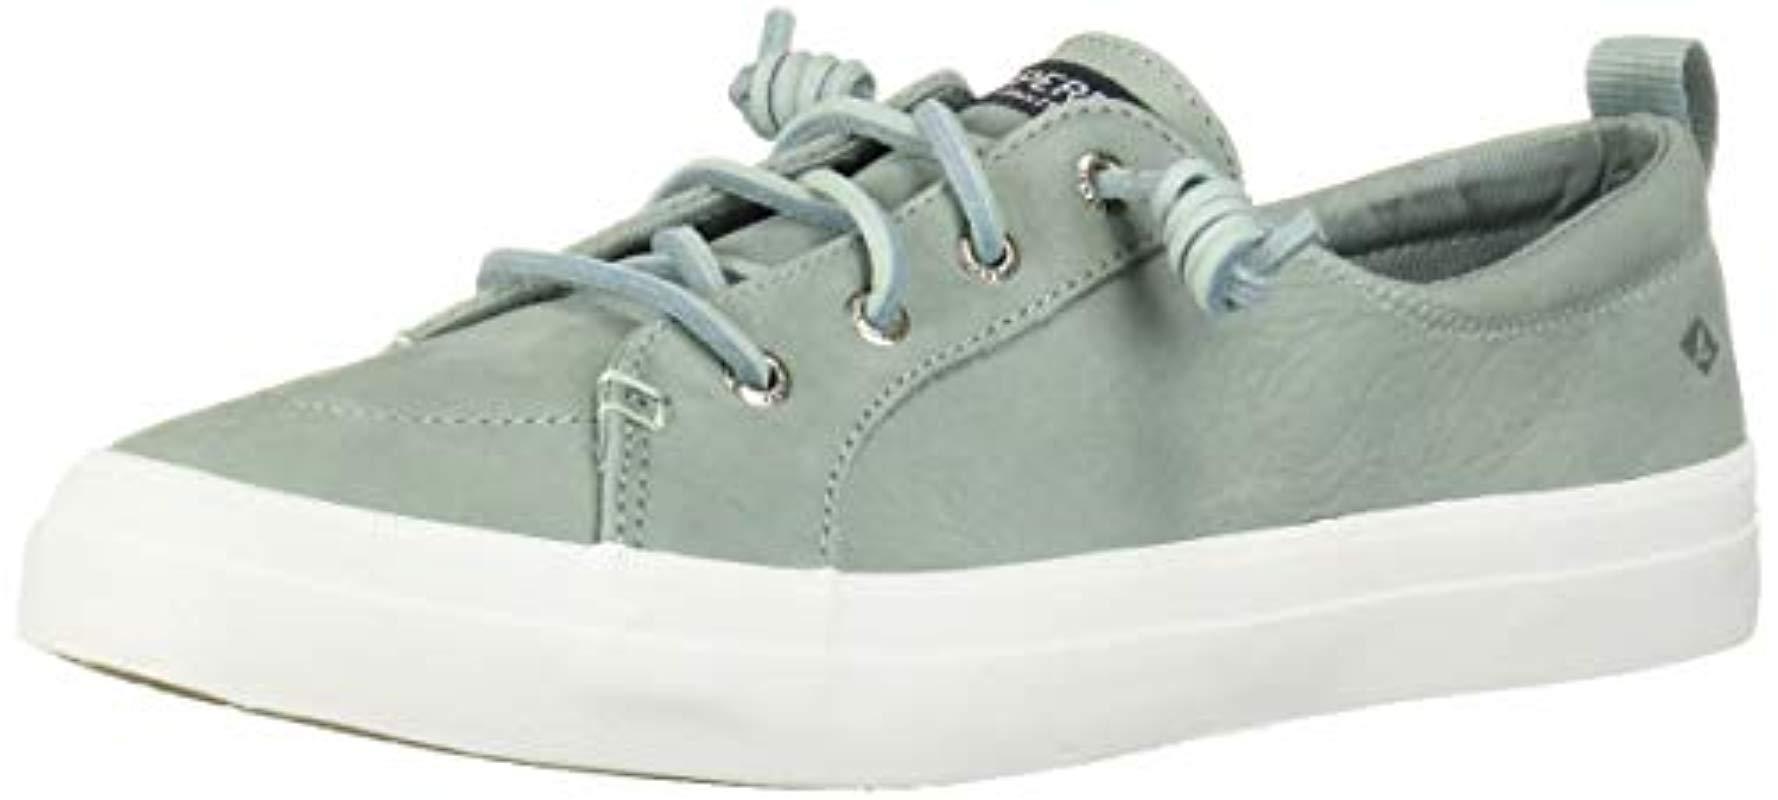 Sperry Top-Sider S Crest Vibe Washable 